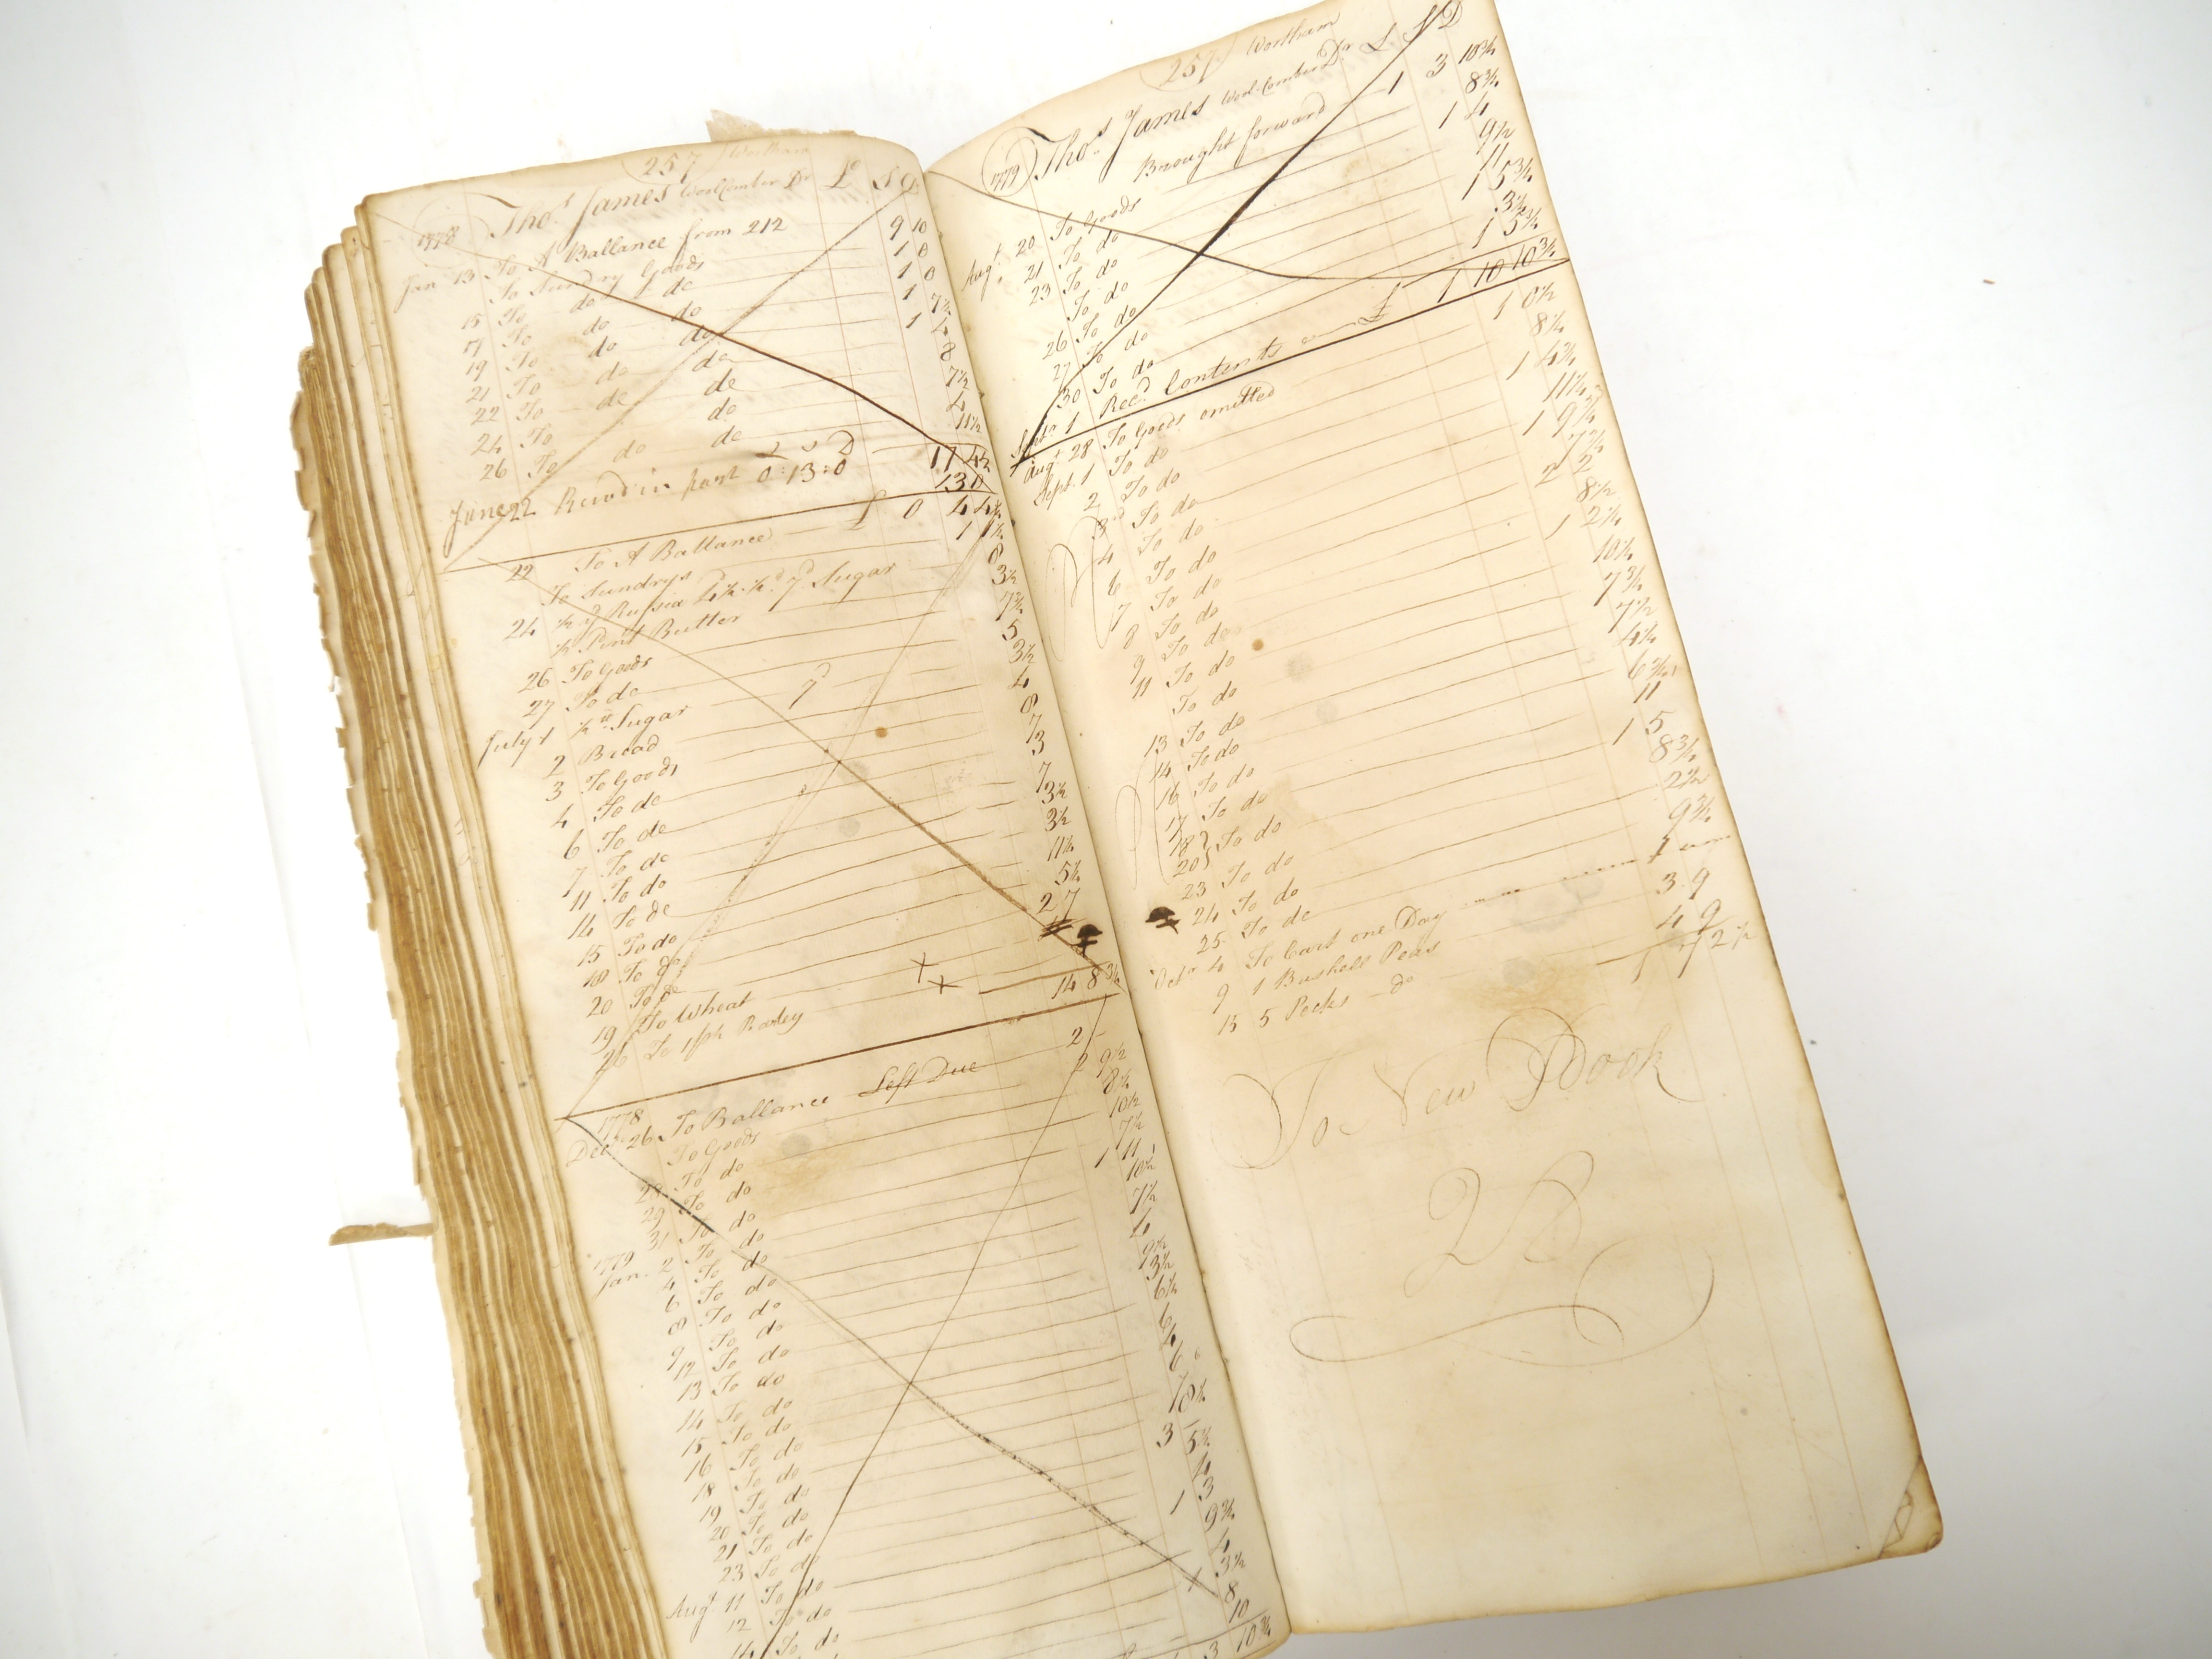 (Suffolk, Wortham.) [Ambrose Wretts.] A large manuscript account book, compiled 1772-1780 in the - Image 12 of 15